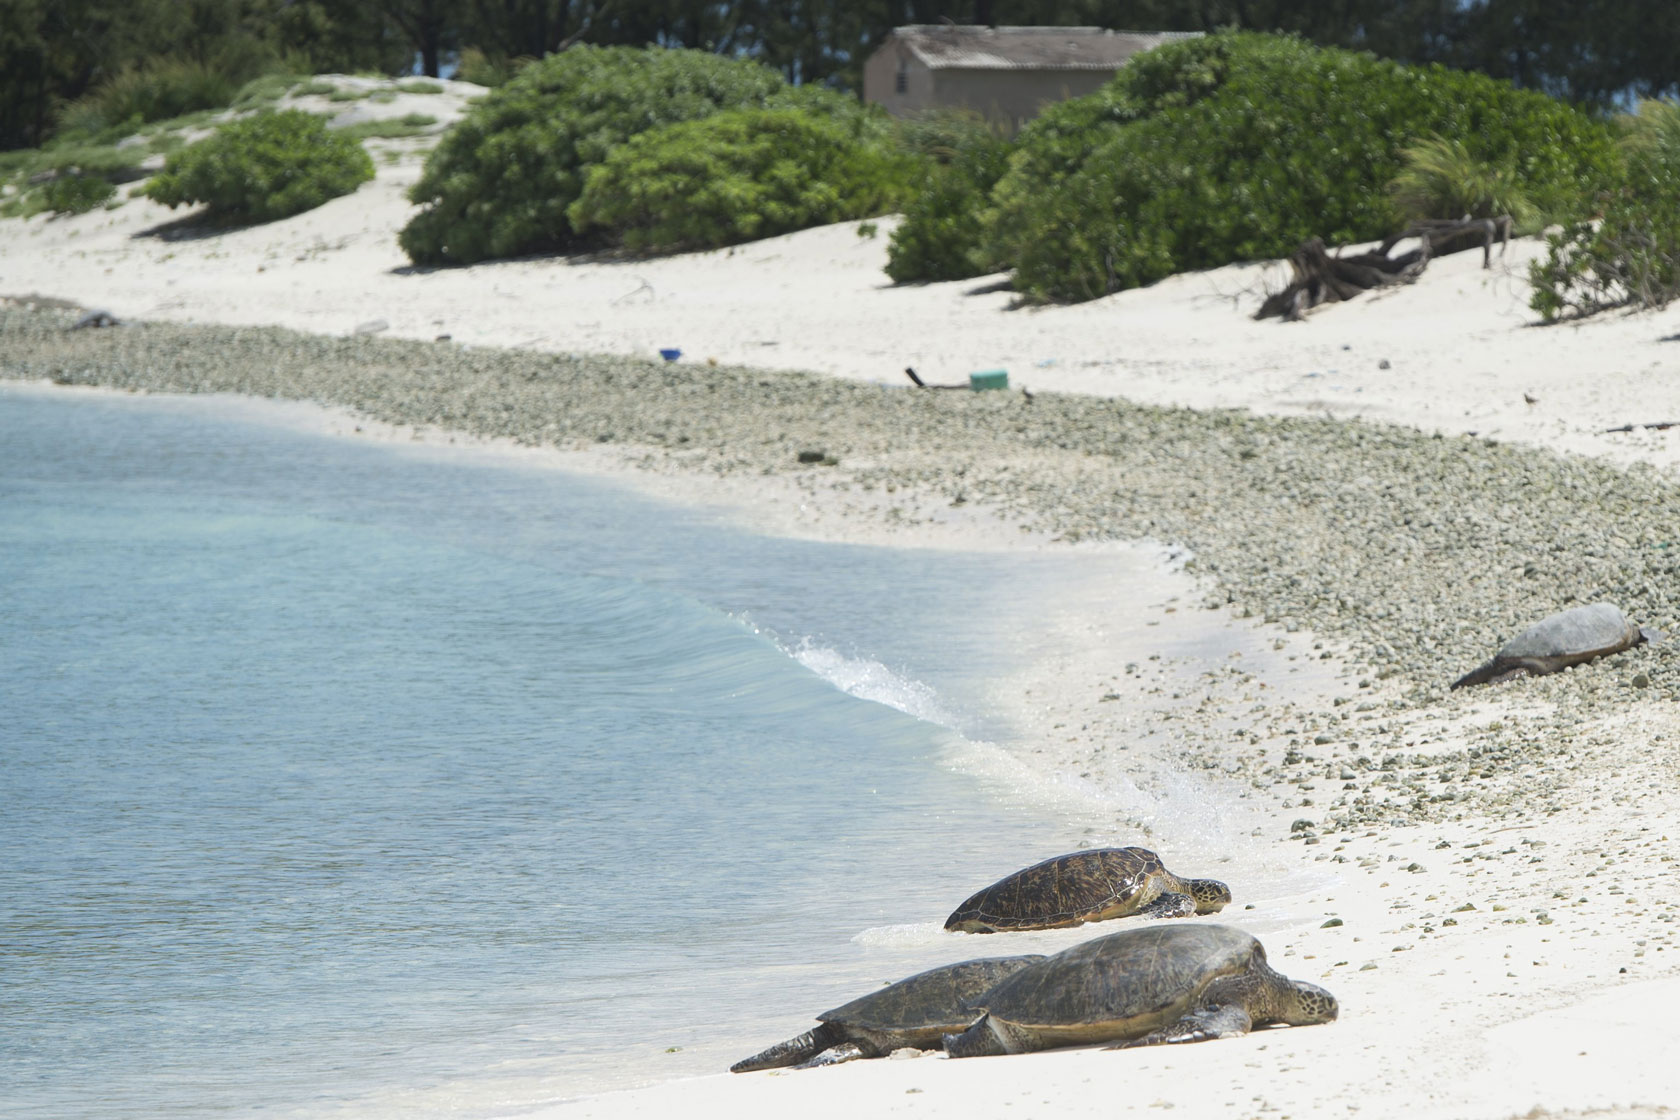 Three large turtles rest above the waterline on a white-sand beach.